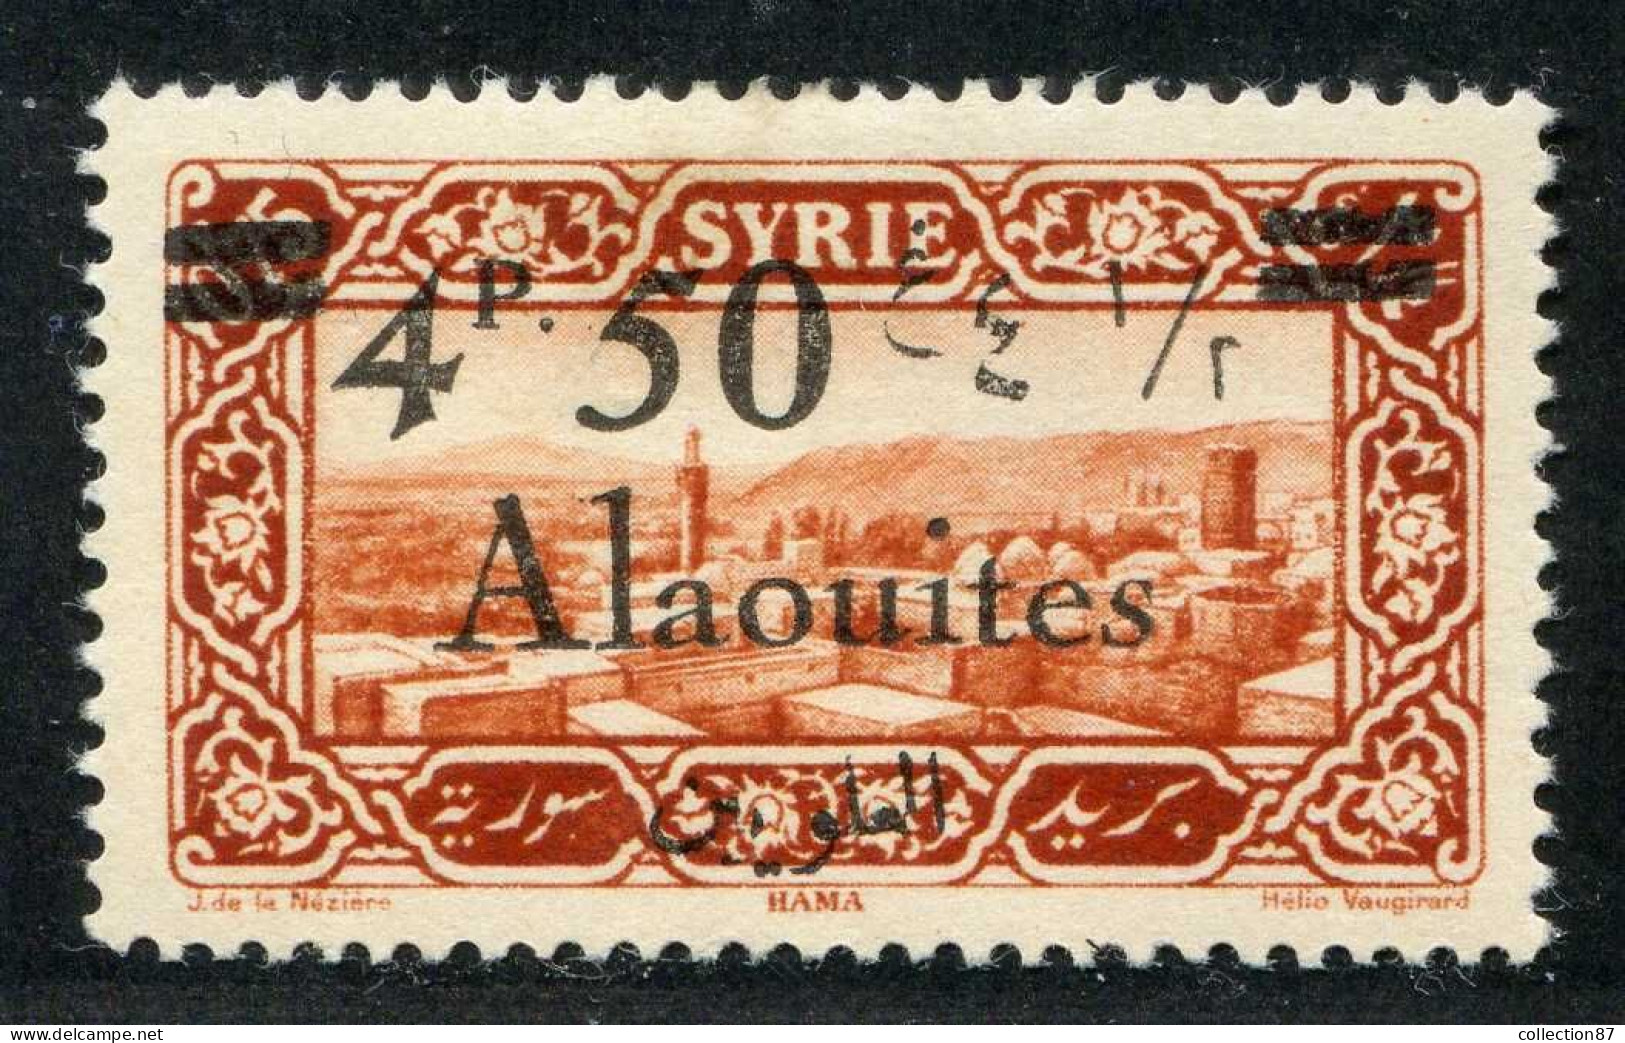 REF 089 > ALAOUITES < N° 44 * < Neuf Ch Dos Visible - MH * - Ungebraucht